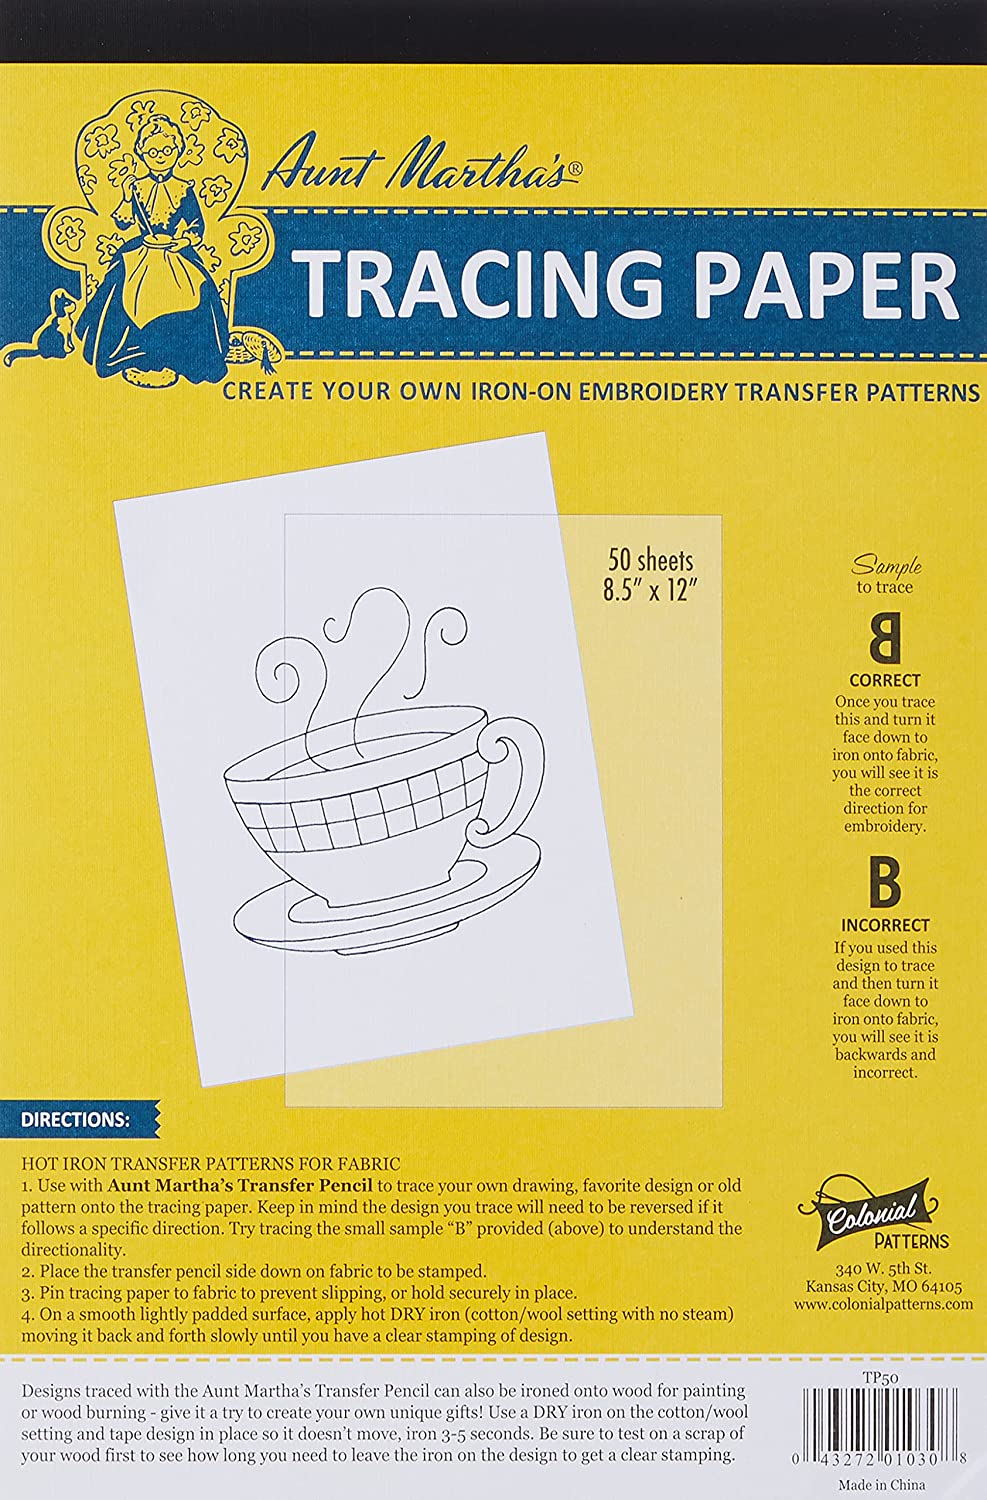 Aunt Martha's Iron-On Embroidery Tracing Paper